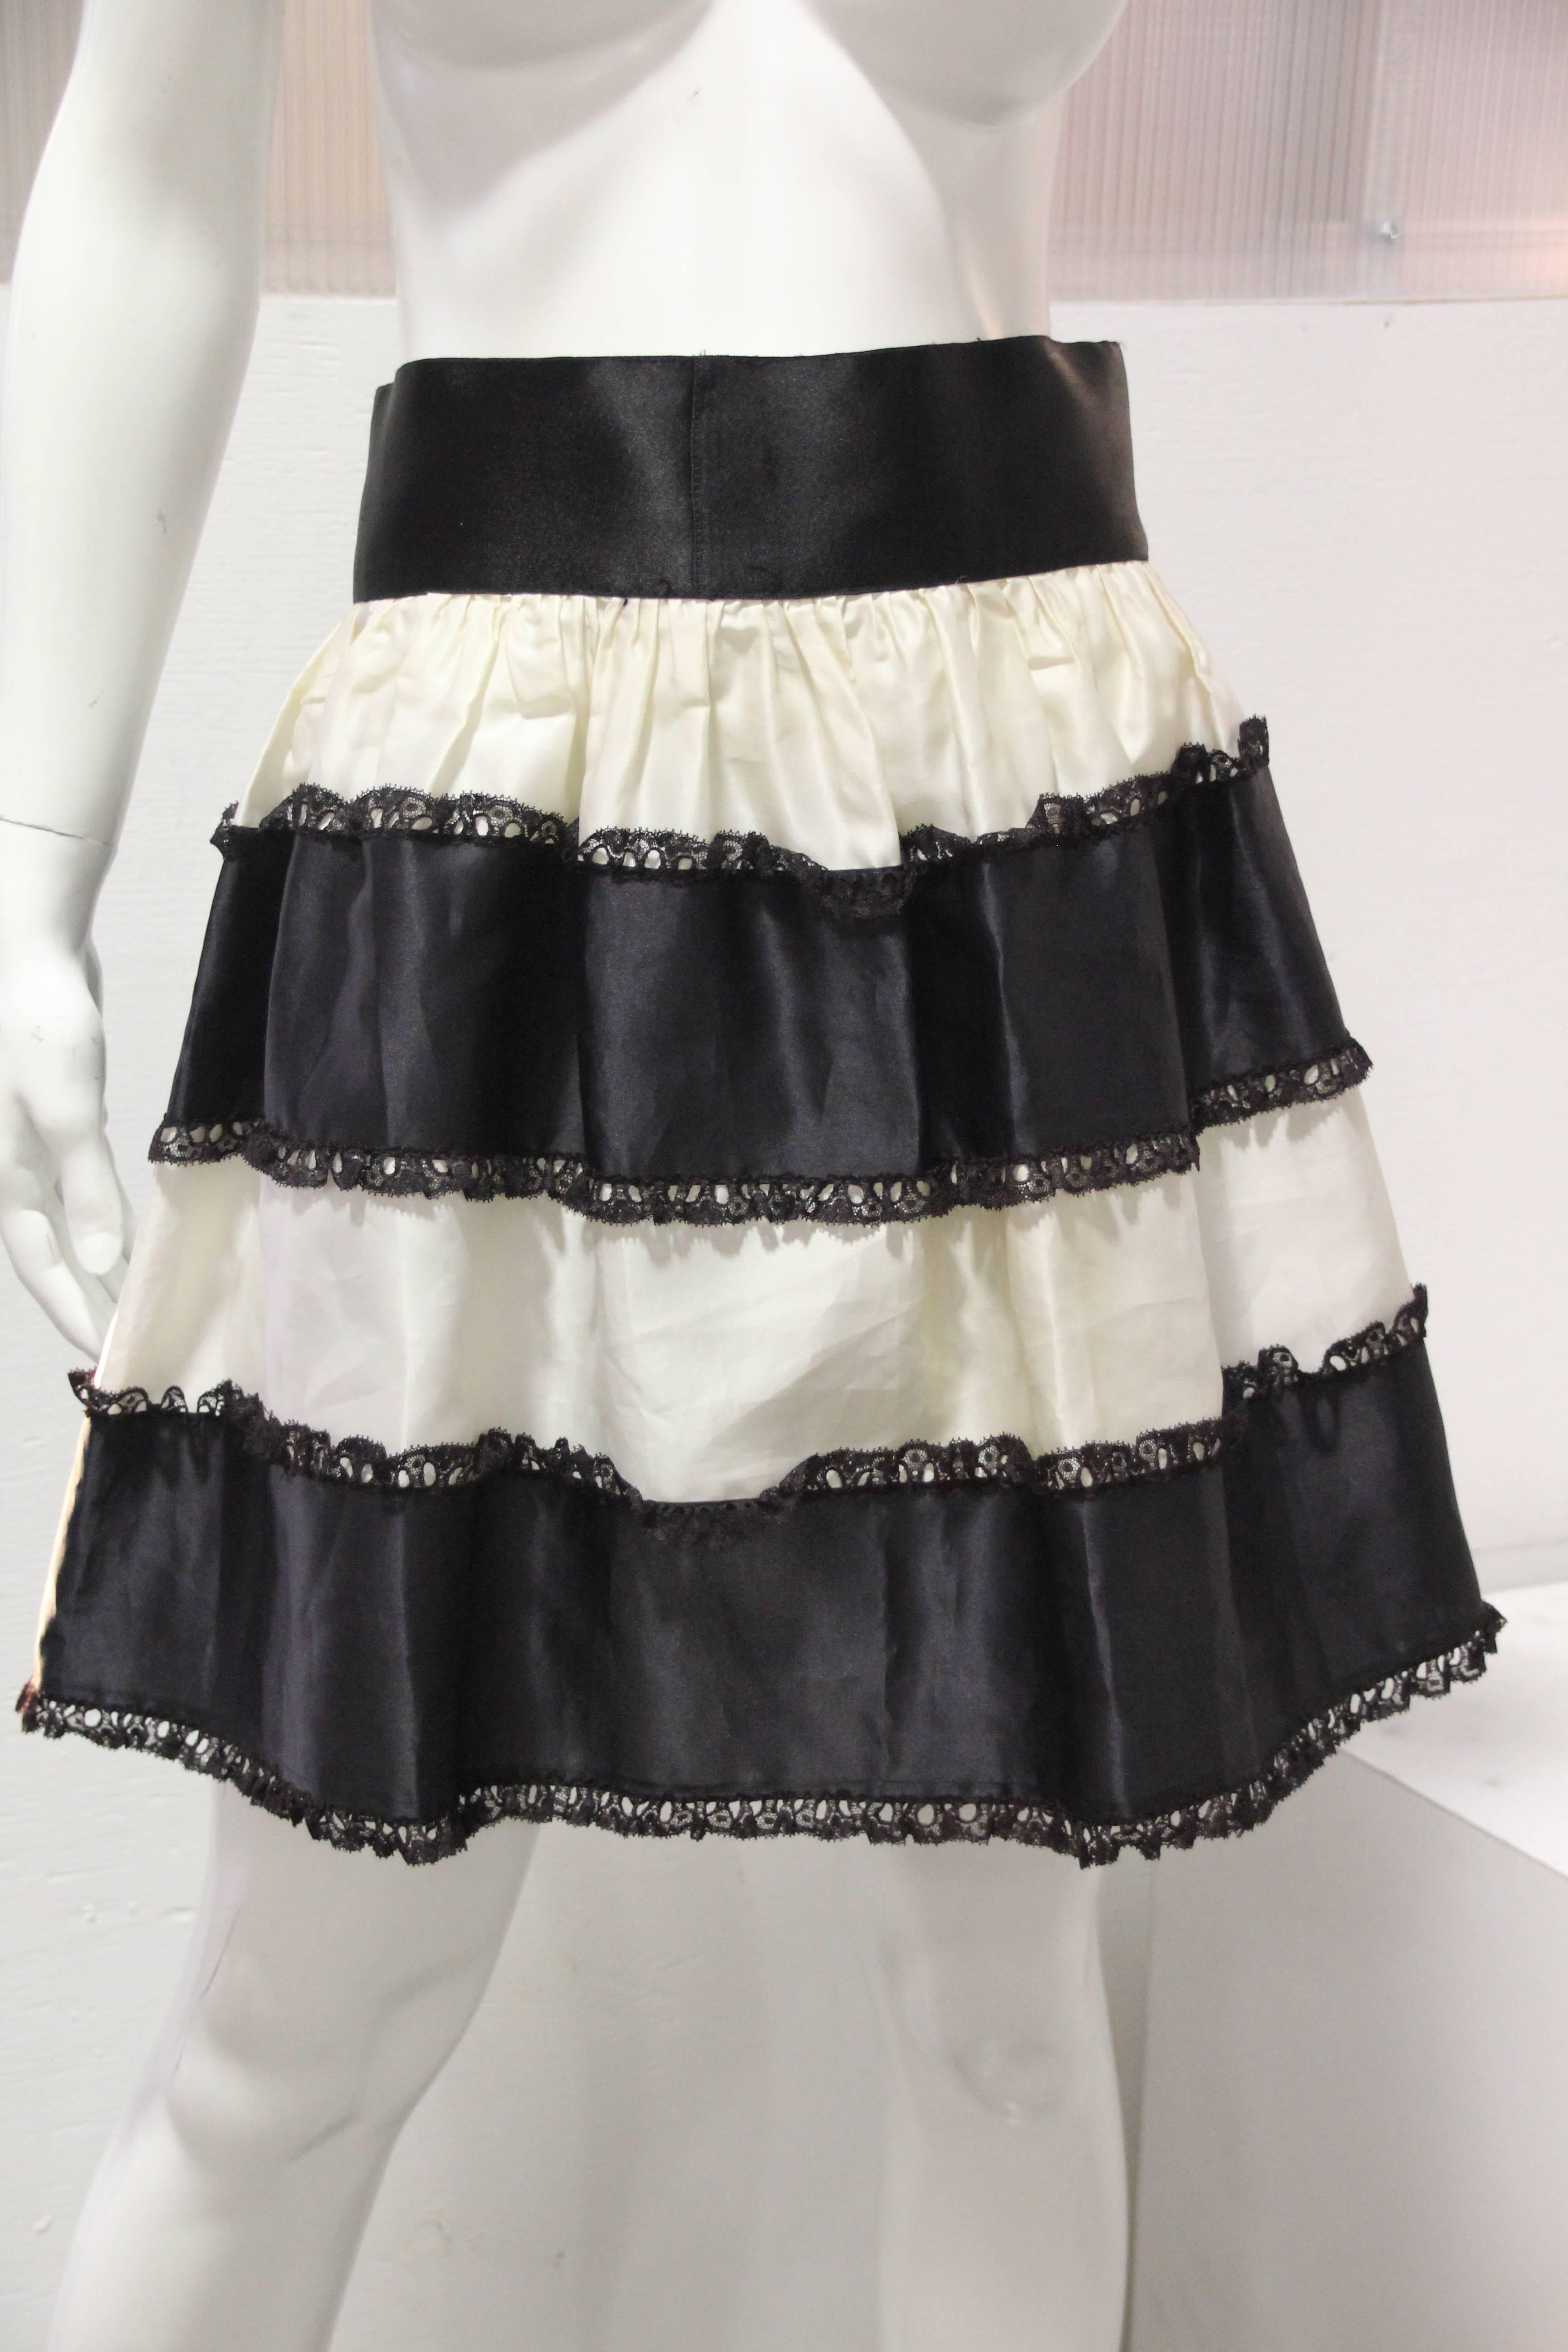 1950s French Maid style satin pin-up bra with peek-a-boo sheer panels (size 34B) pair with a tiered organza black and white petticoat. Silk satin waistband to match the bra. 